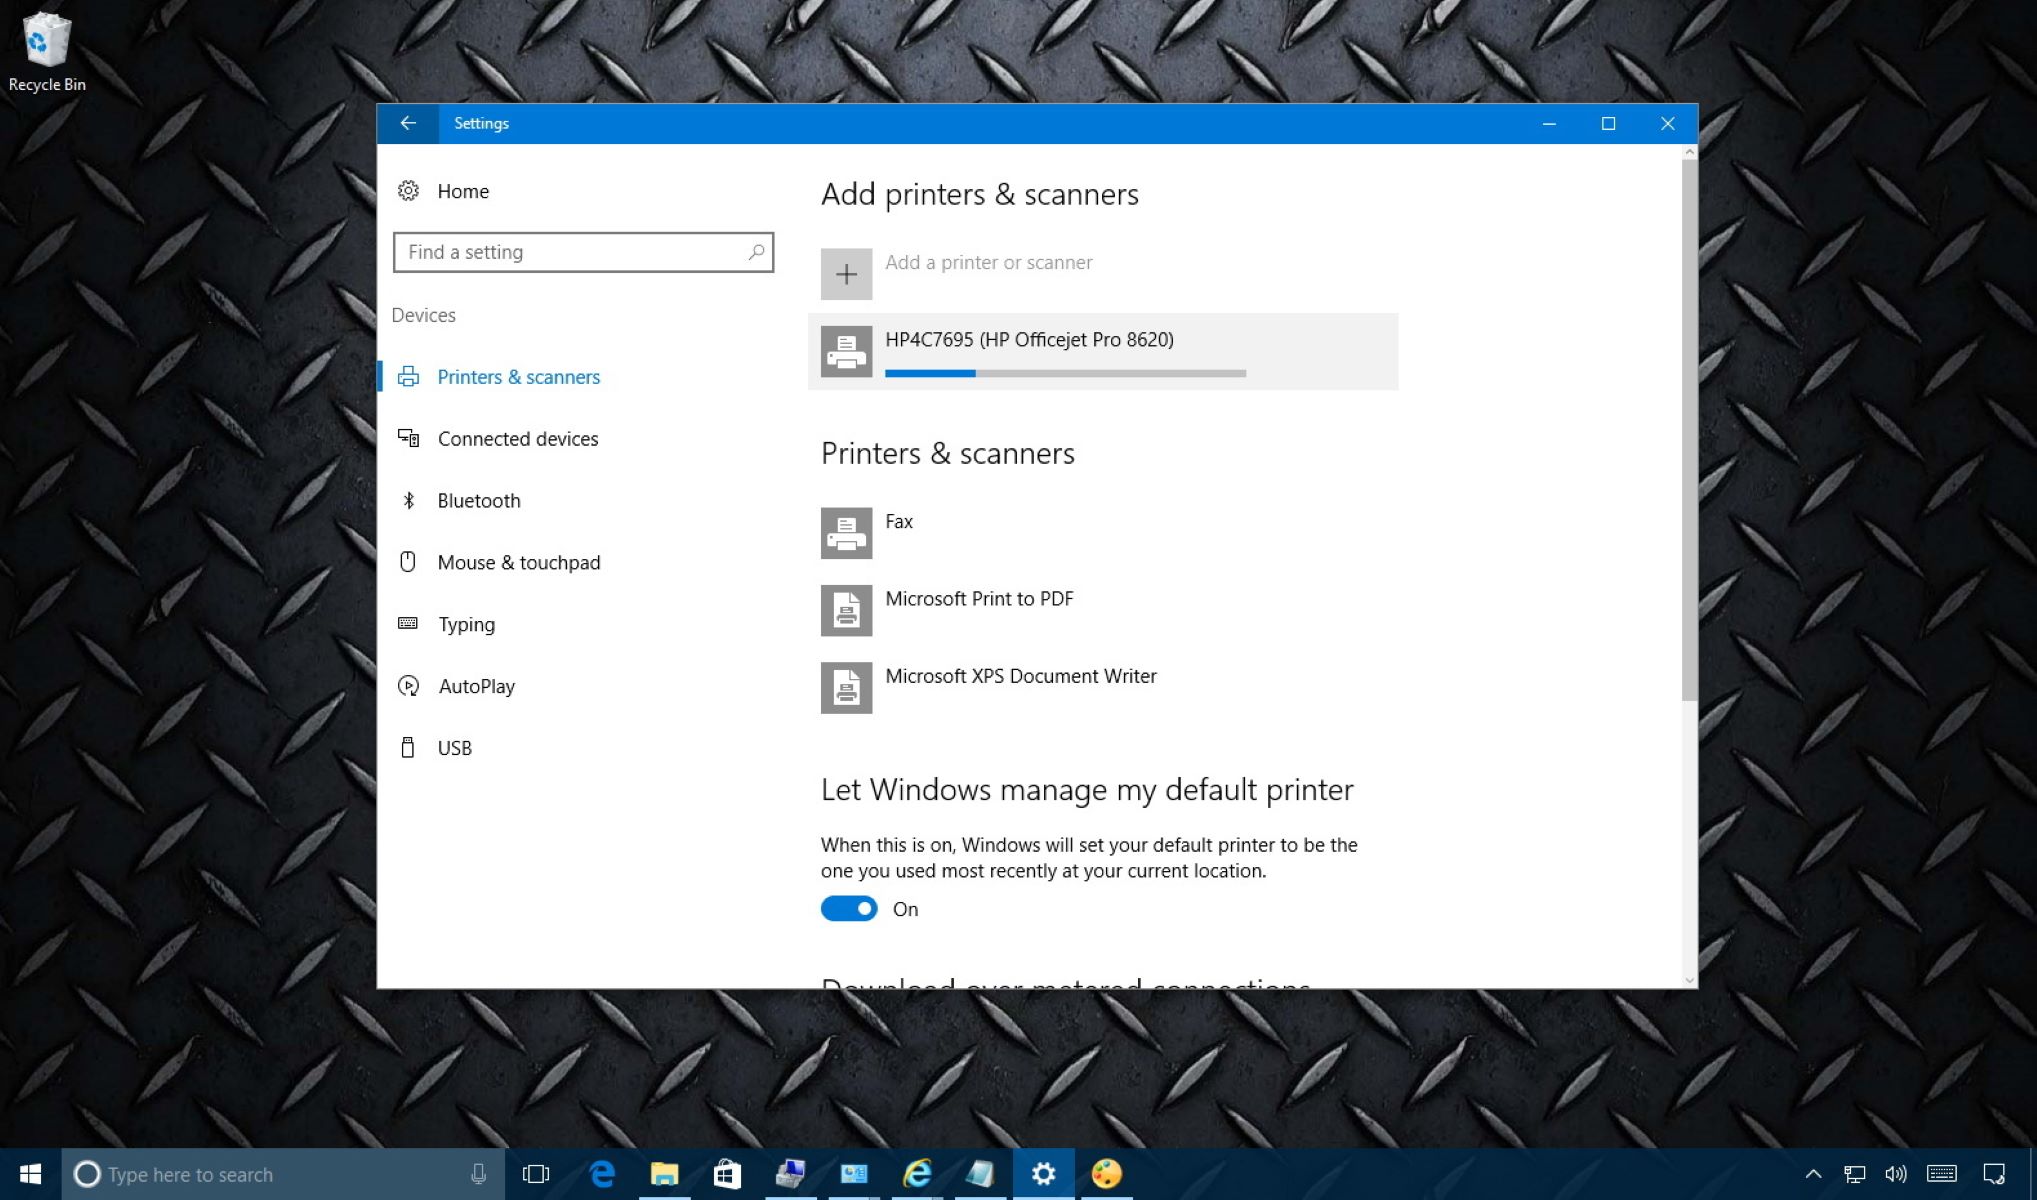 How To Add A Printer To Windows 10